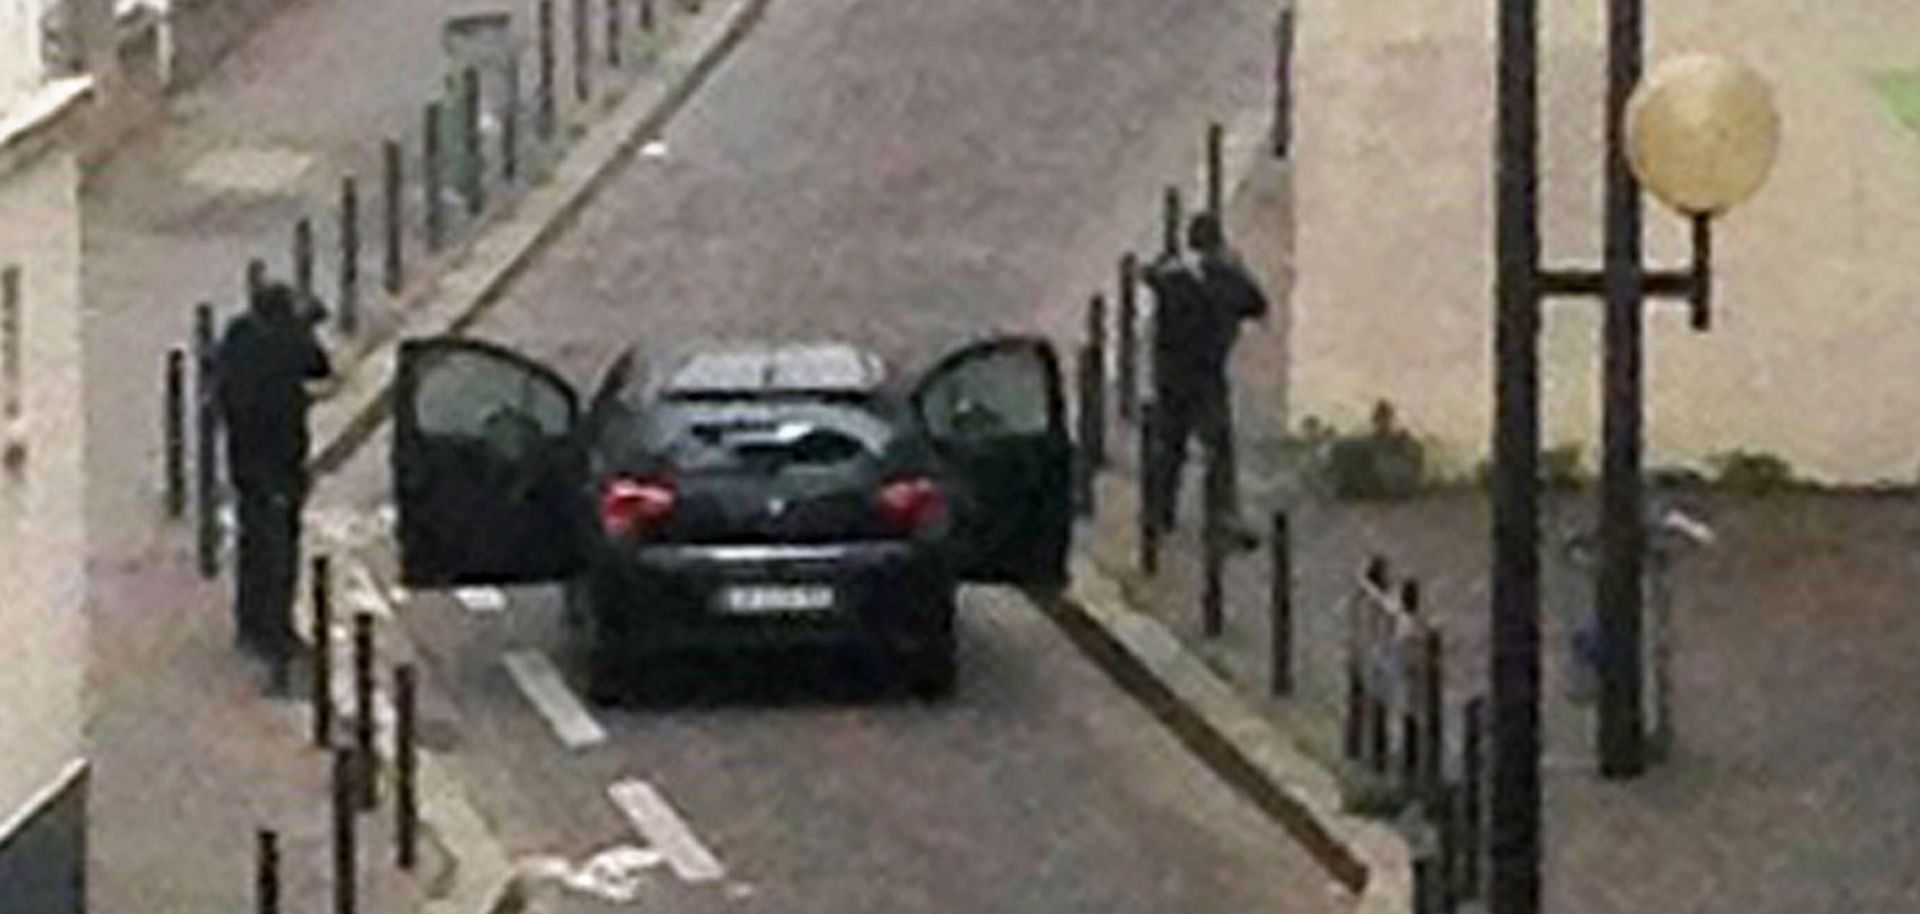 Armed gunmen on the streets of Paris in the Charlie Hebdo attack in 2015 were professional operatives but grassroots jihadist attackers can pose an equal threat.